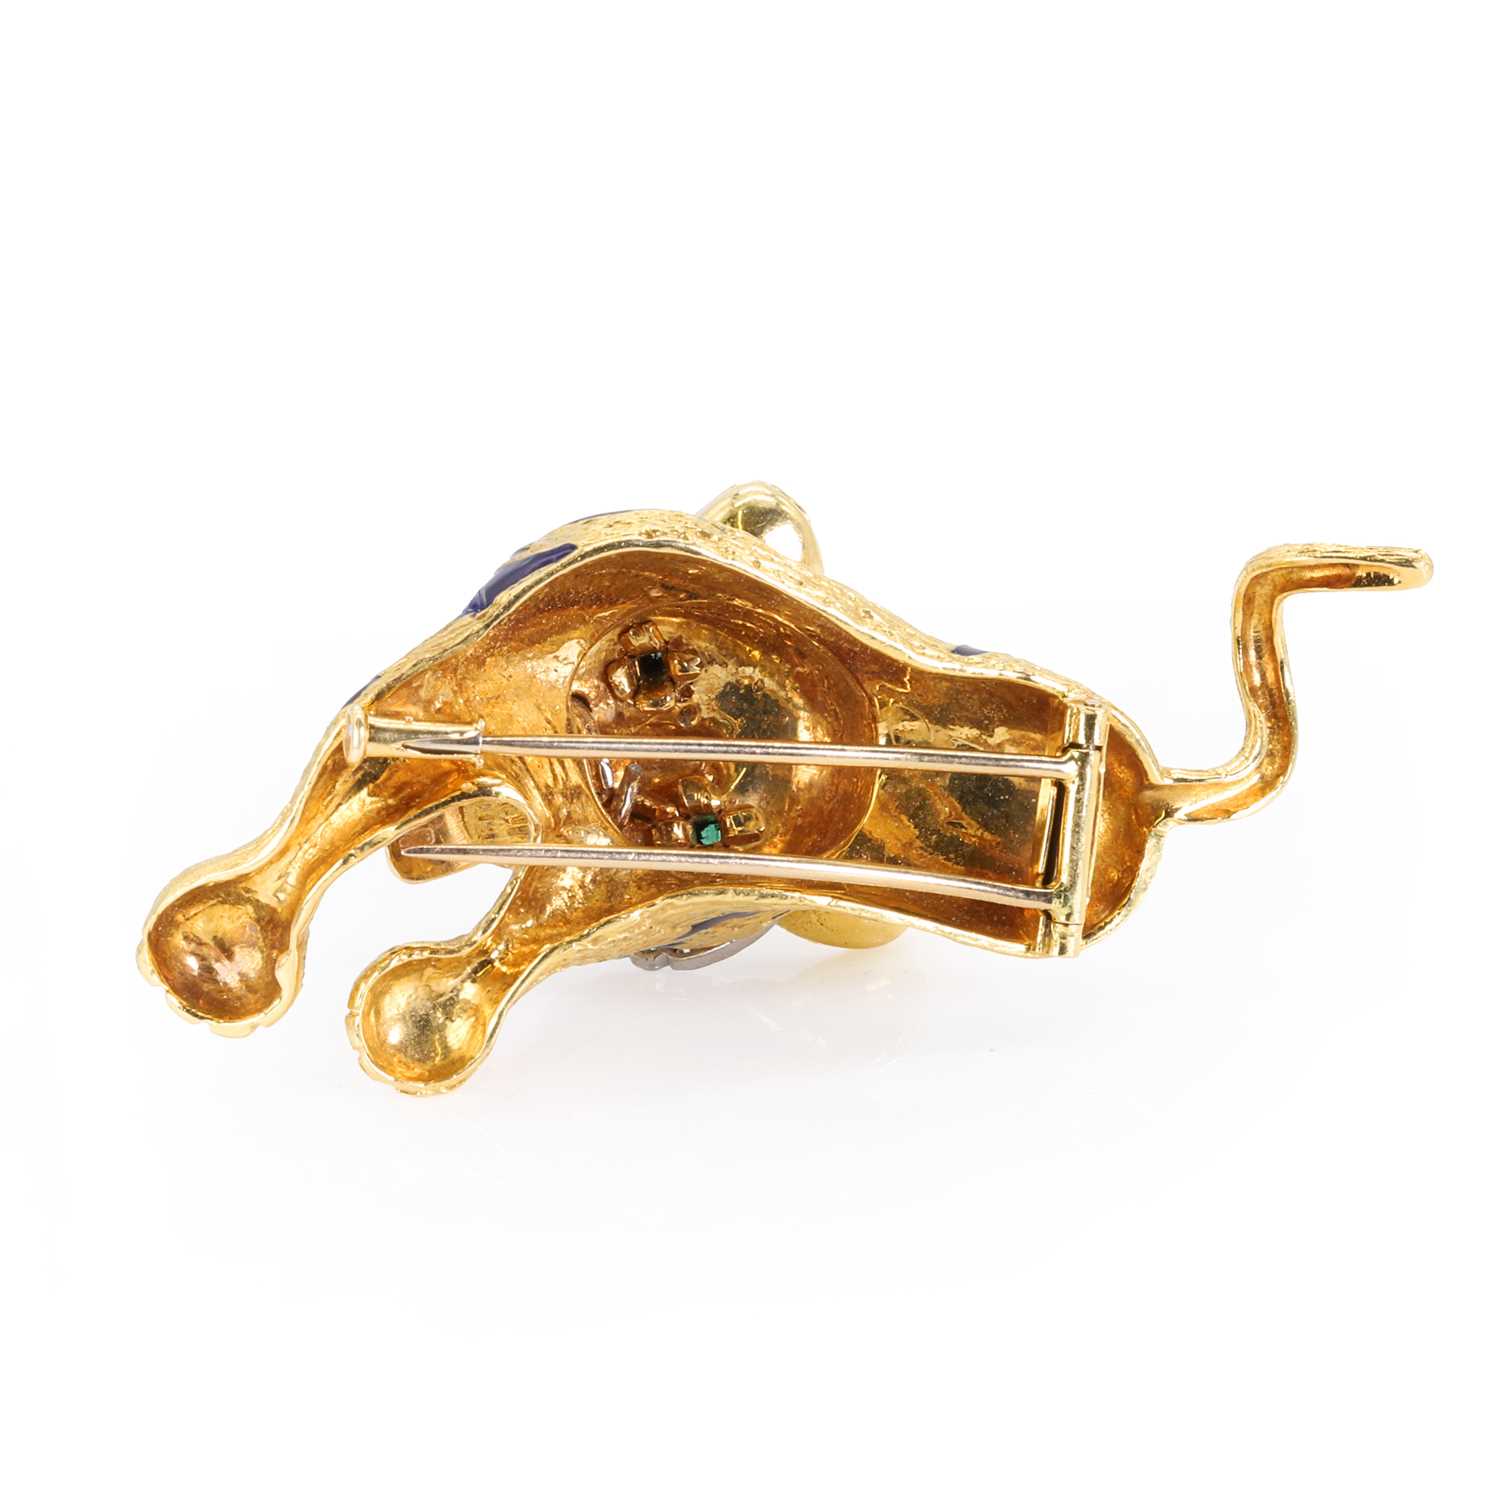 An 18ct gold, enamel and diamond novelty brooch, by Kutchinsky, - Image 4 of 4